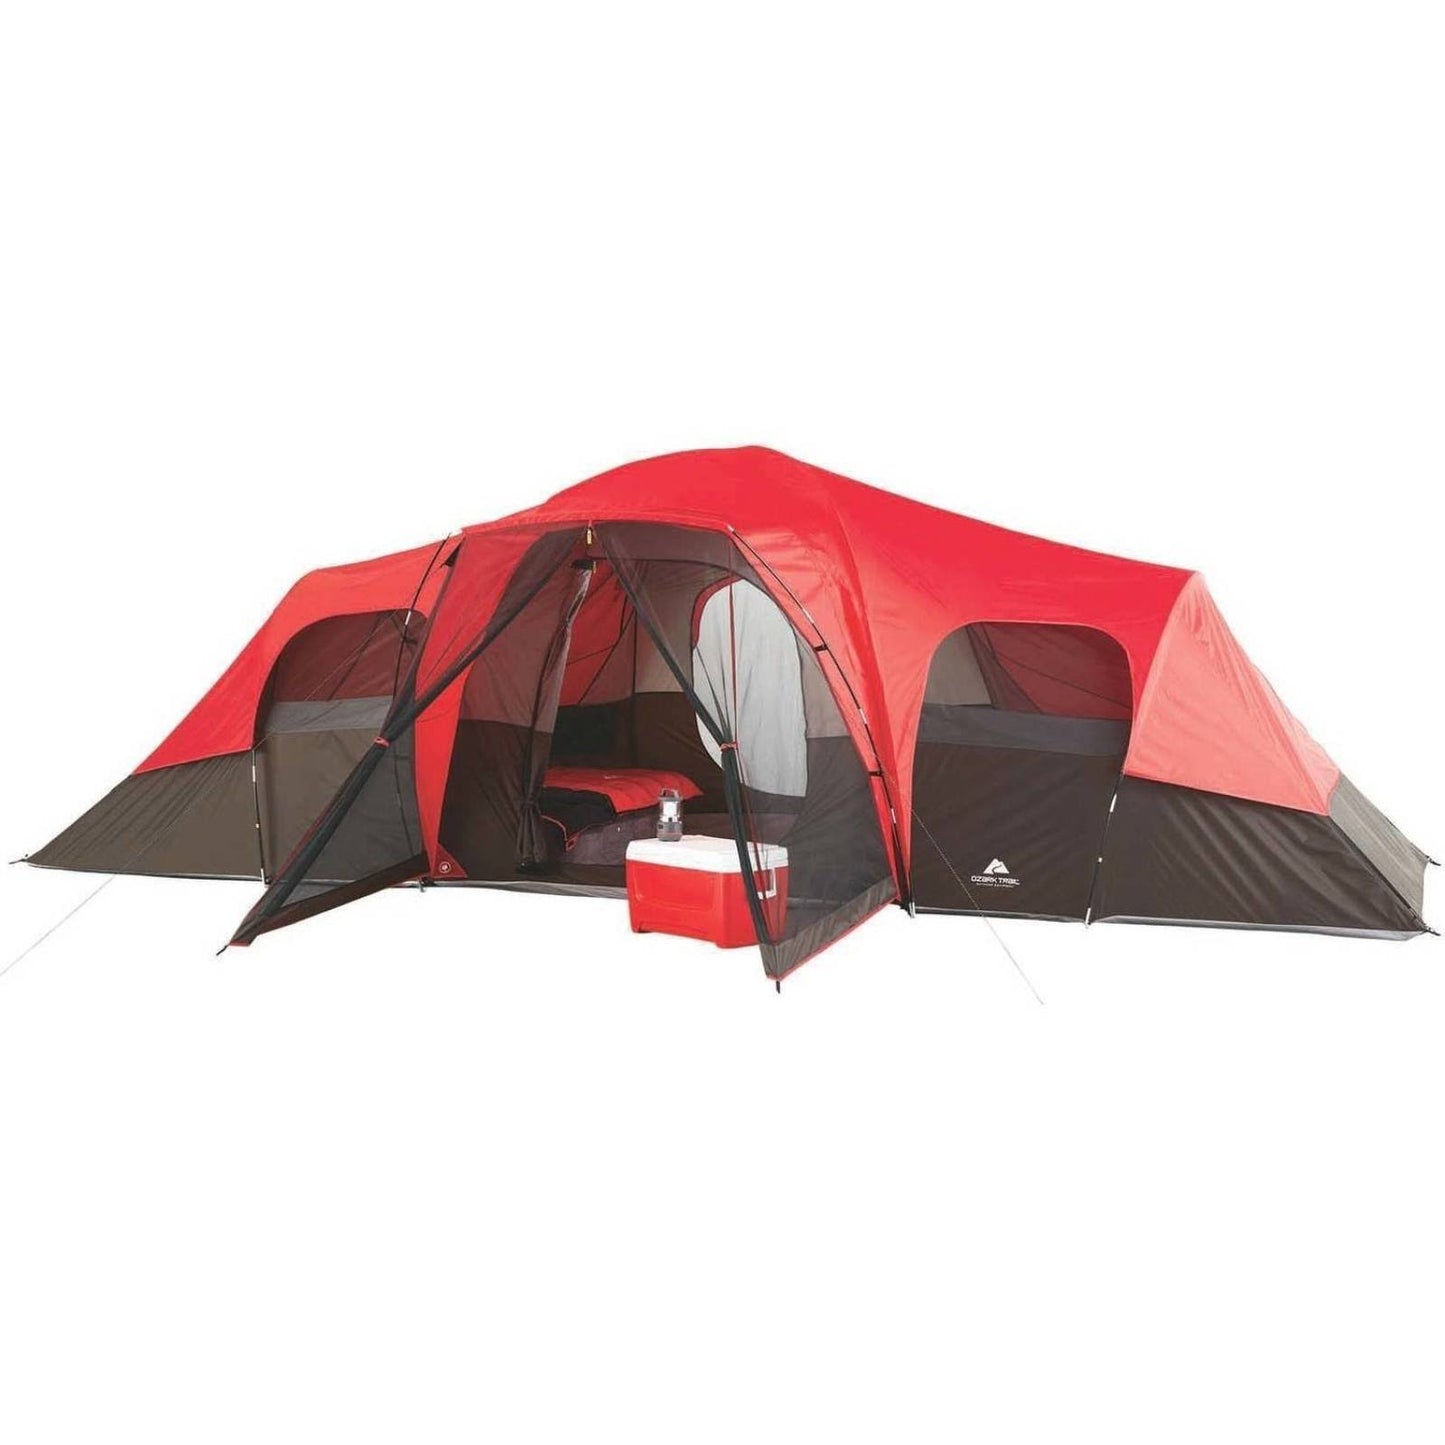 10 Person Cabin Tent with Screen Porch - Waterproof & Red